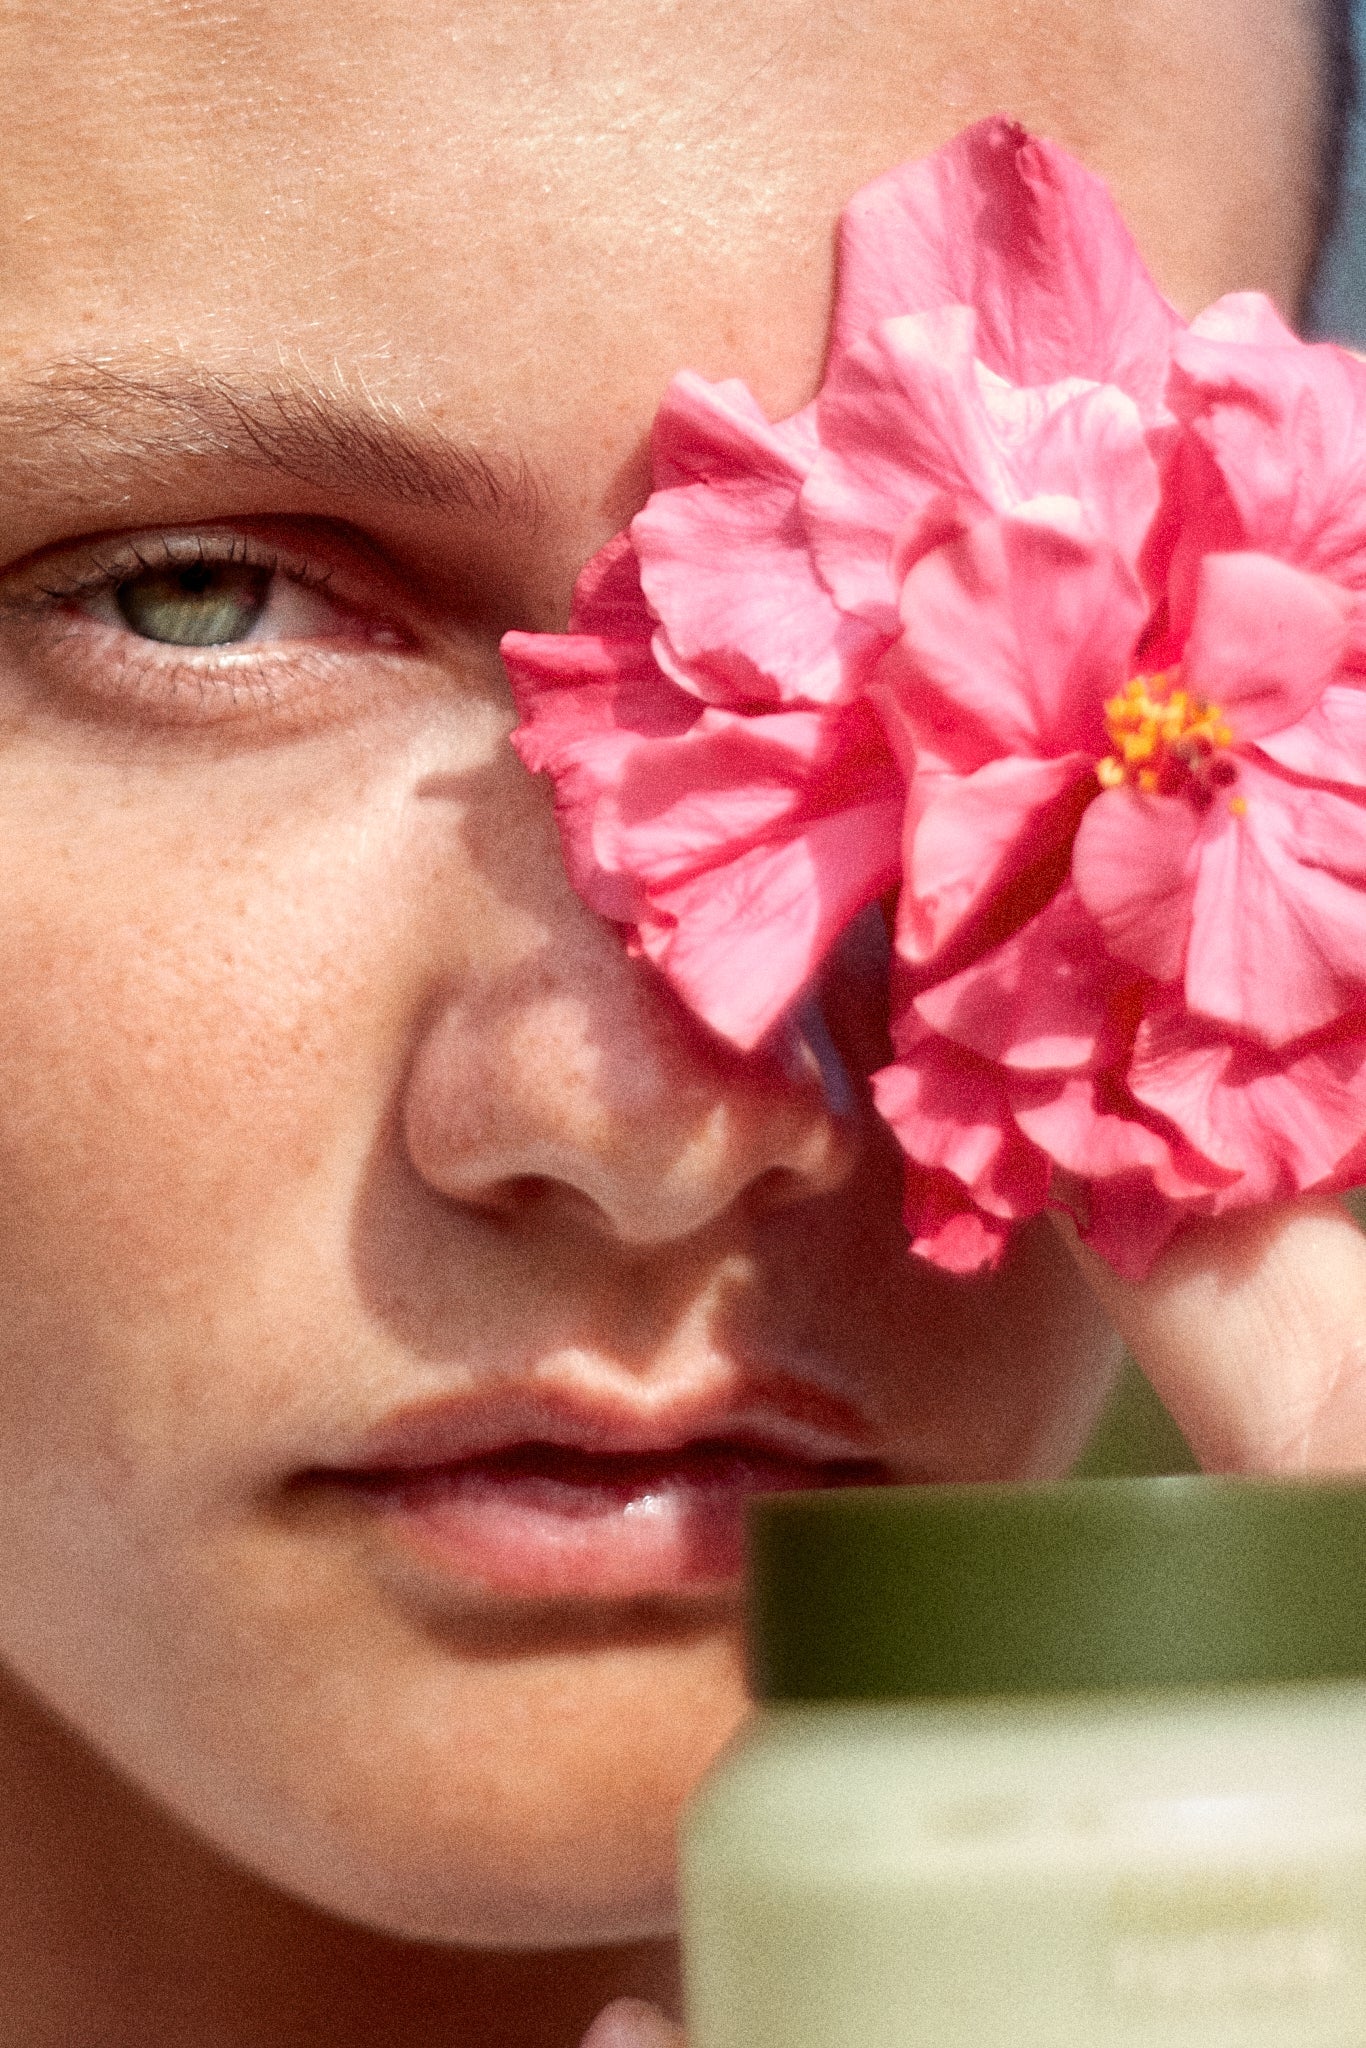 Campaign shot of a model holding a flower and the Floral Fusion Antioxidant Cream by Fields of Yarrow next to her face